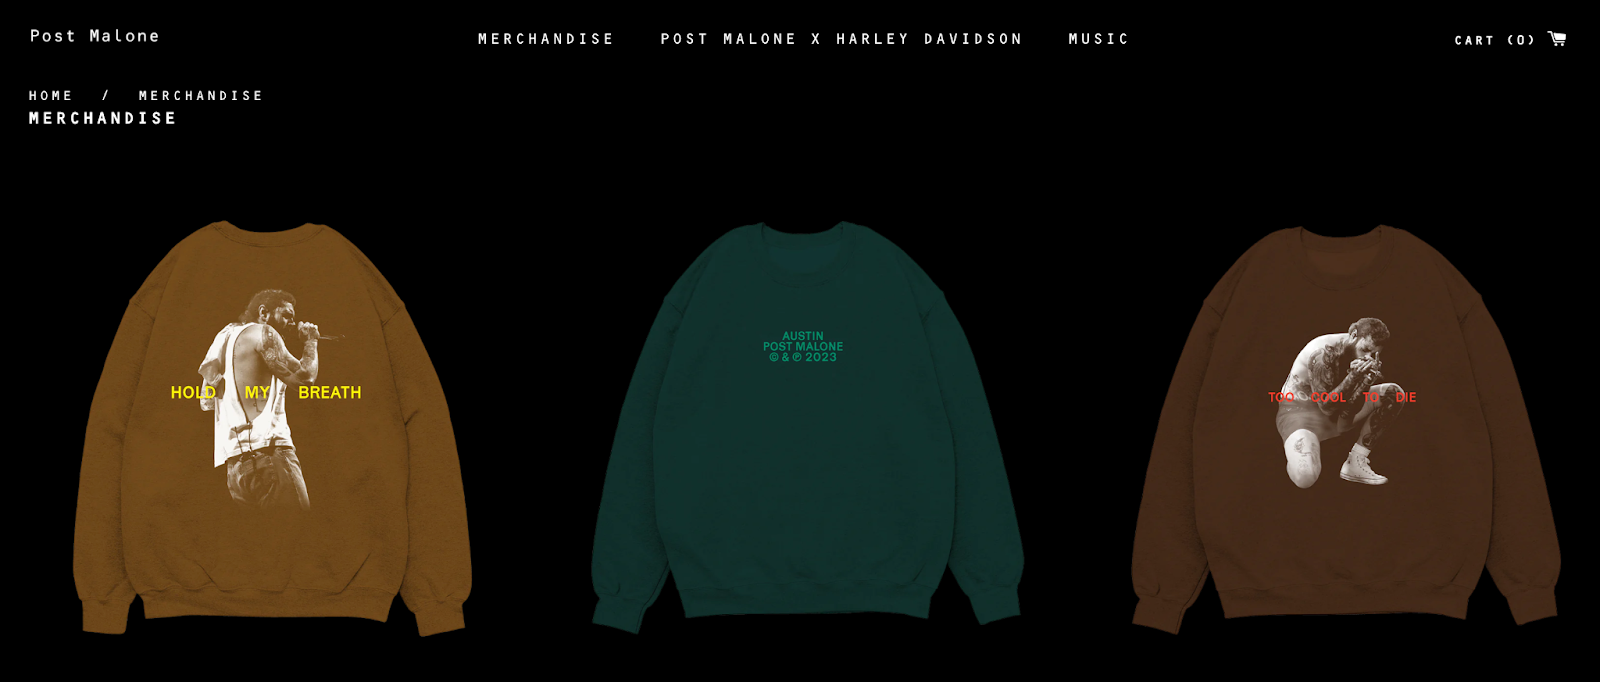 Post Malone makes money as a musician with a merch store, with three sweaters available for preorder.